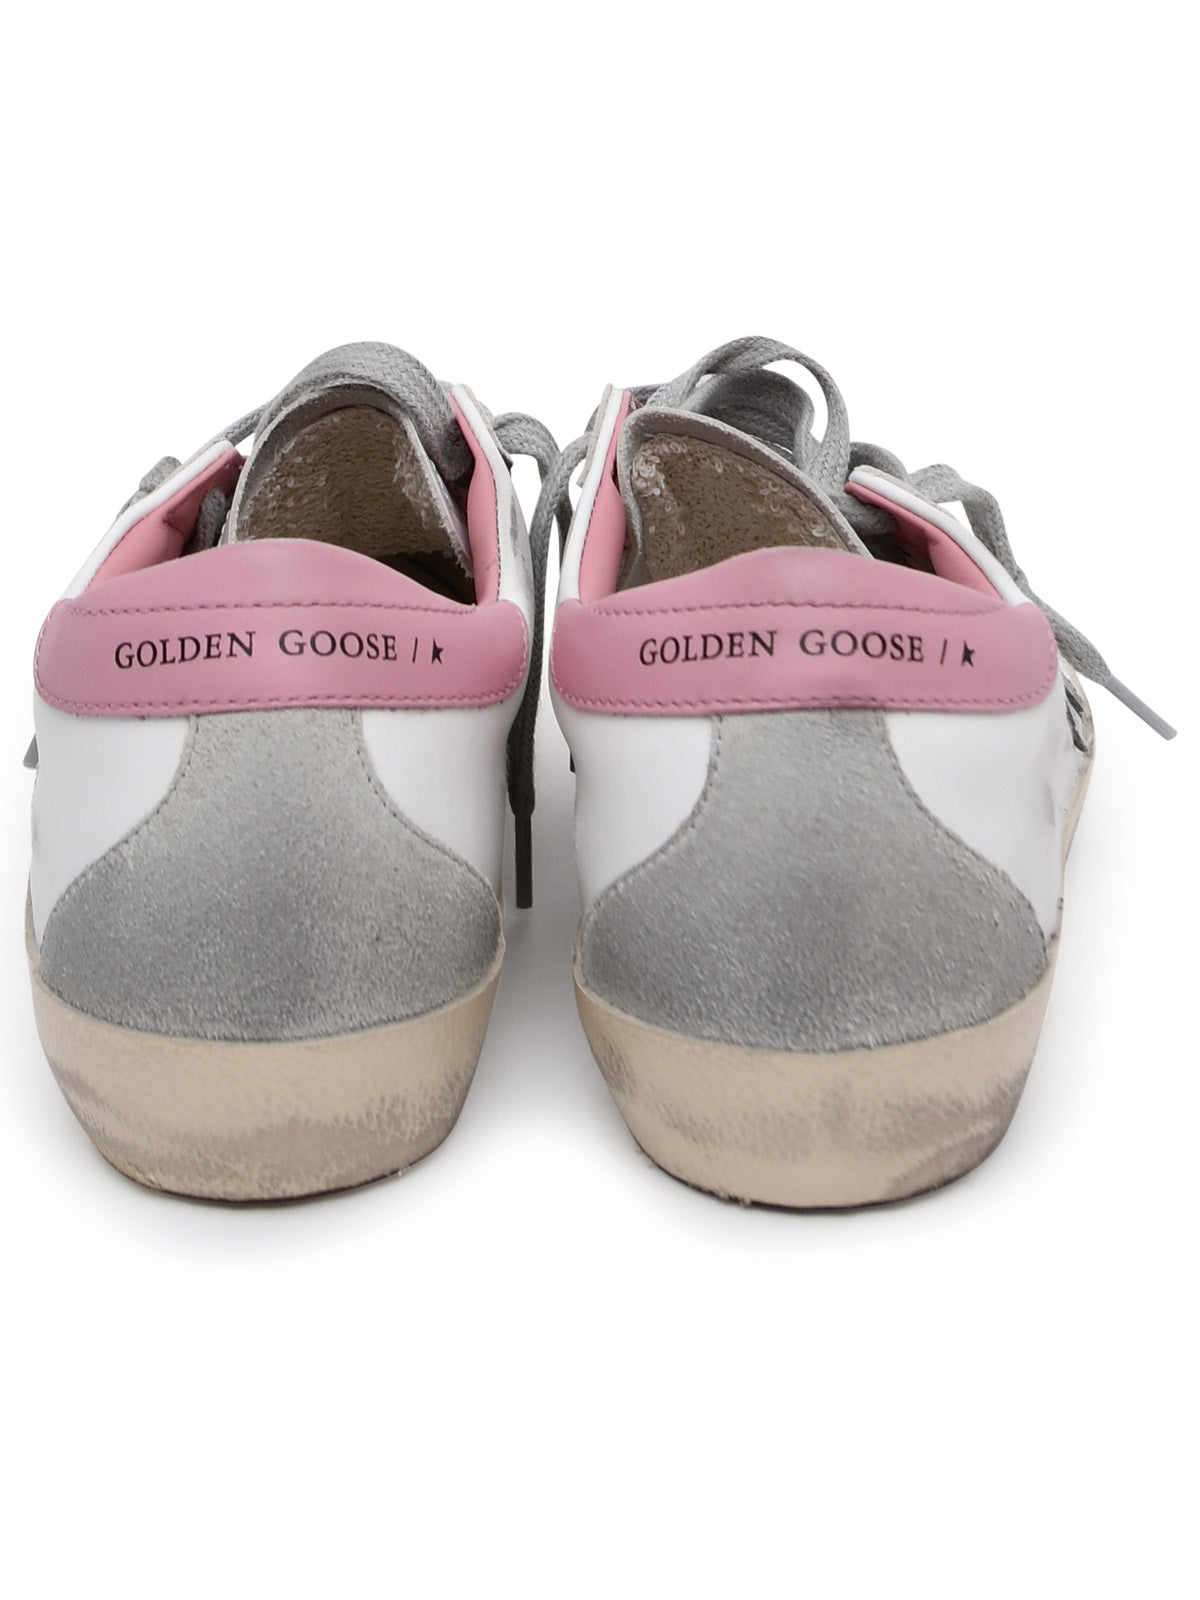 Golden Goose Woman White Leather Superstar Sneakers